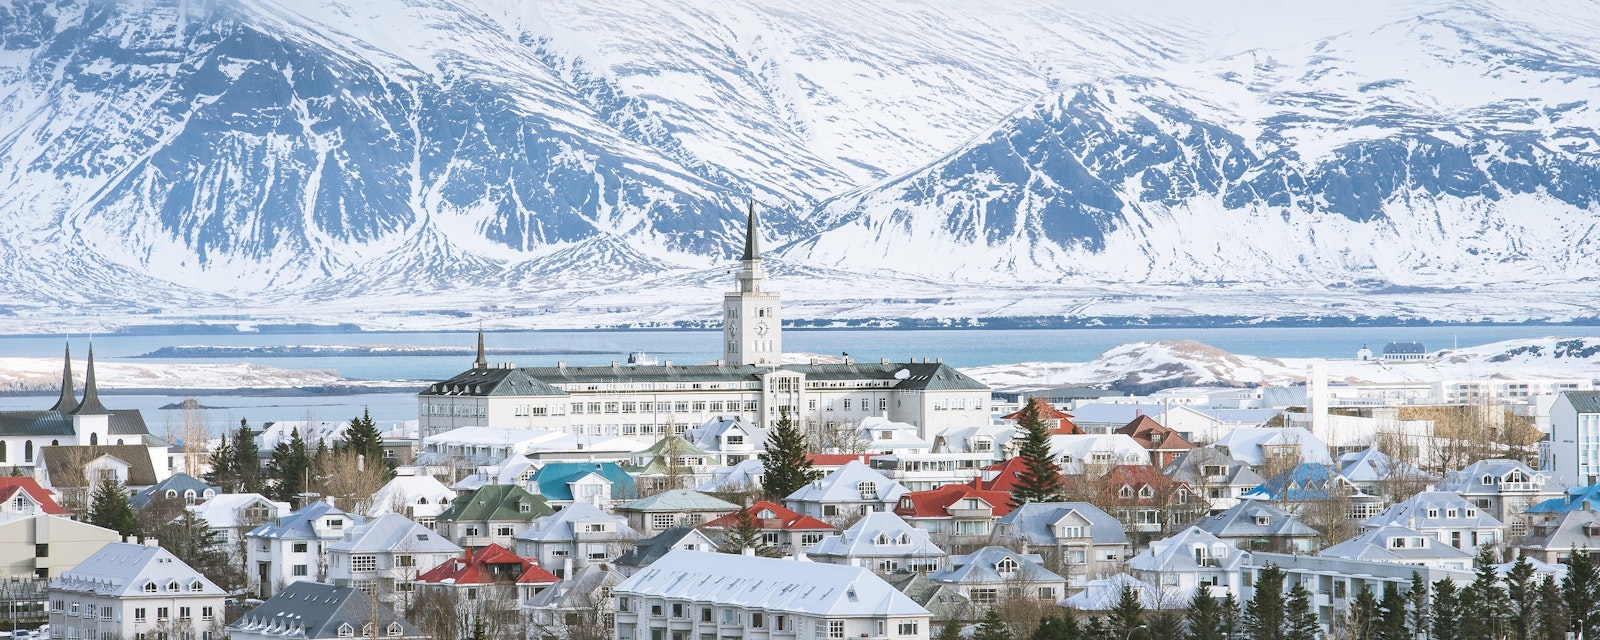 Reykjavik,The,Capital,City,Of,Iceland,In,Winter,Snow,View